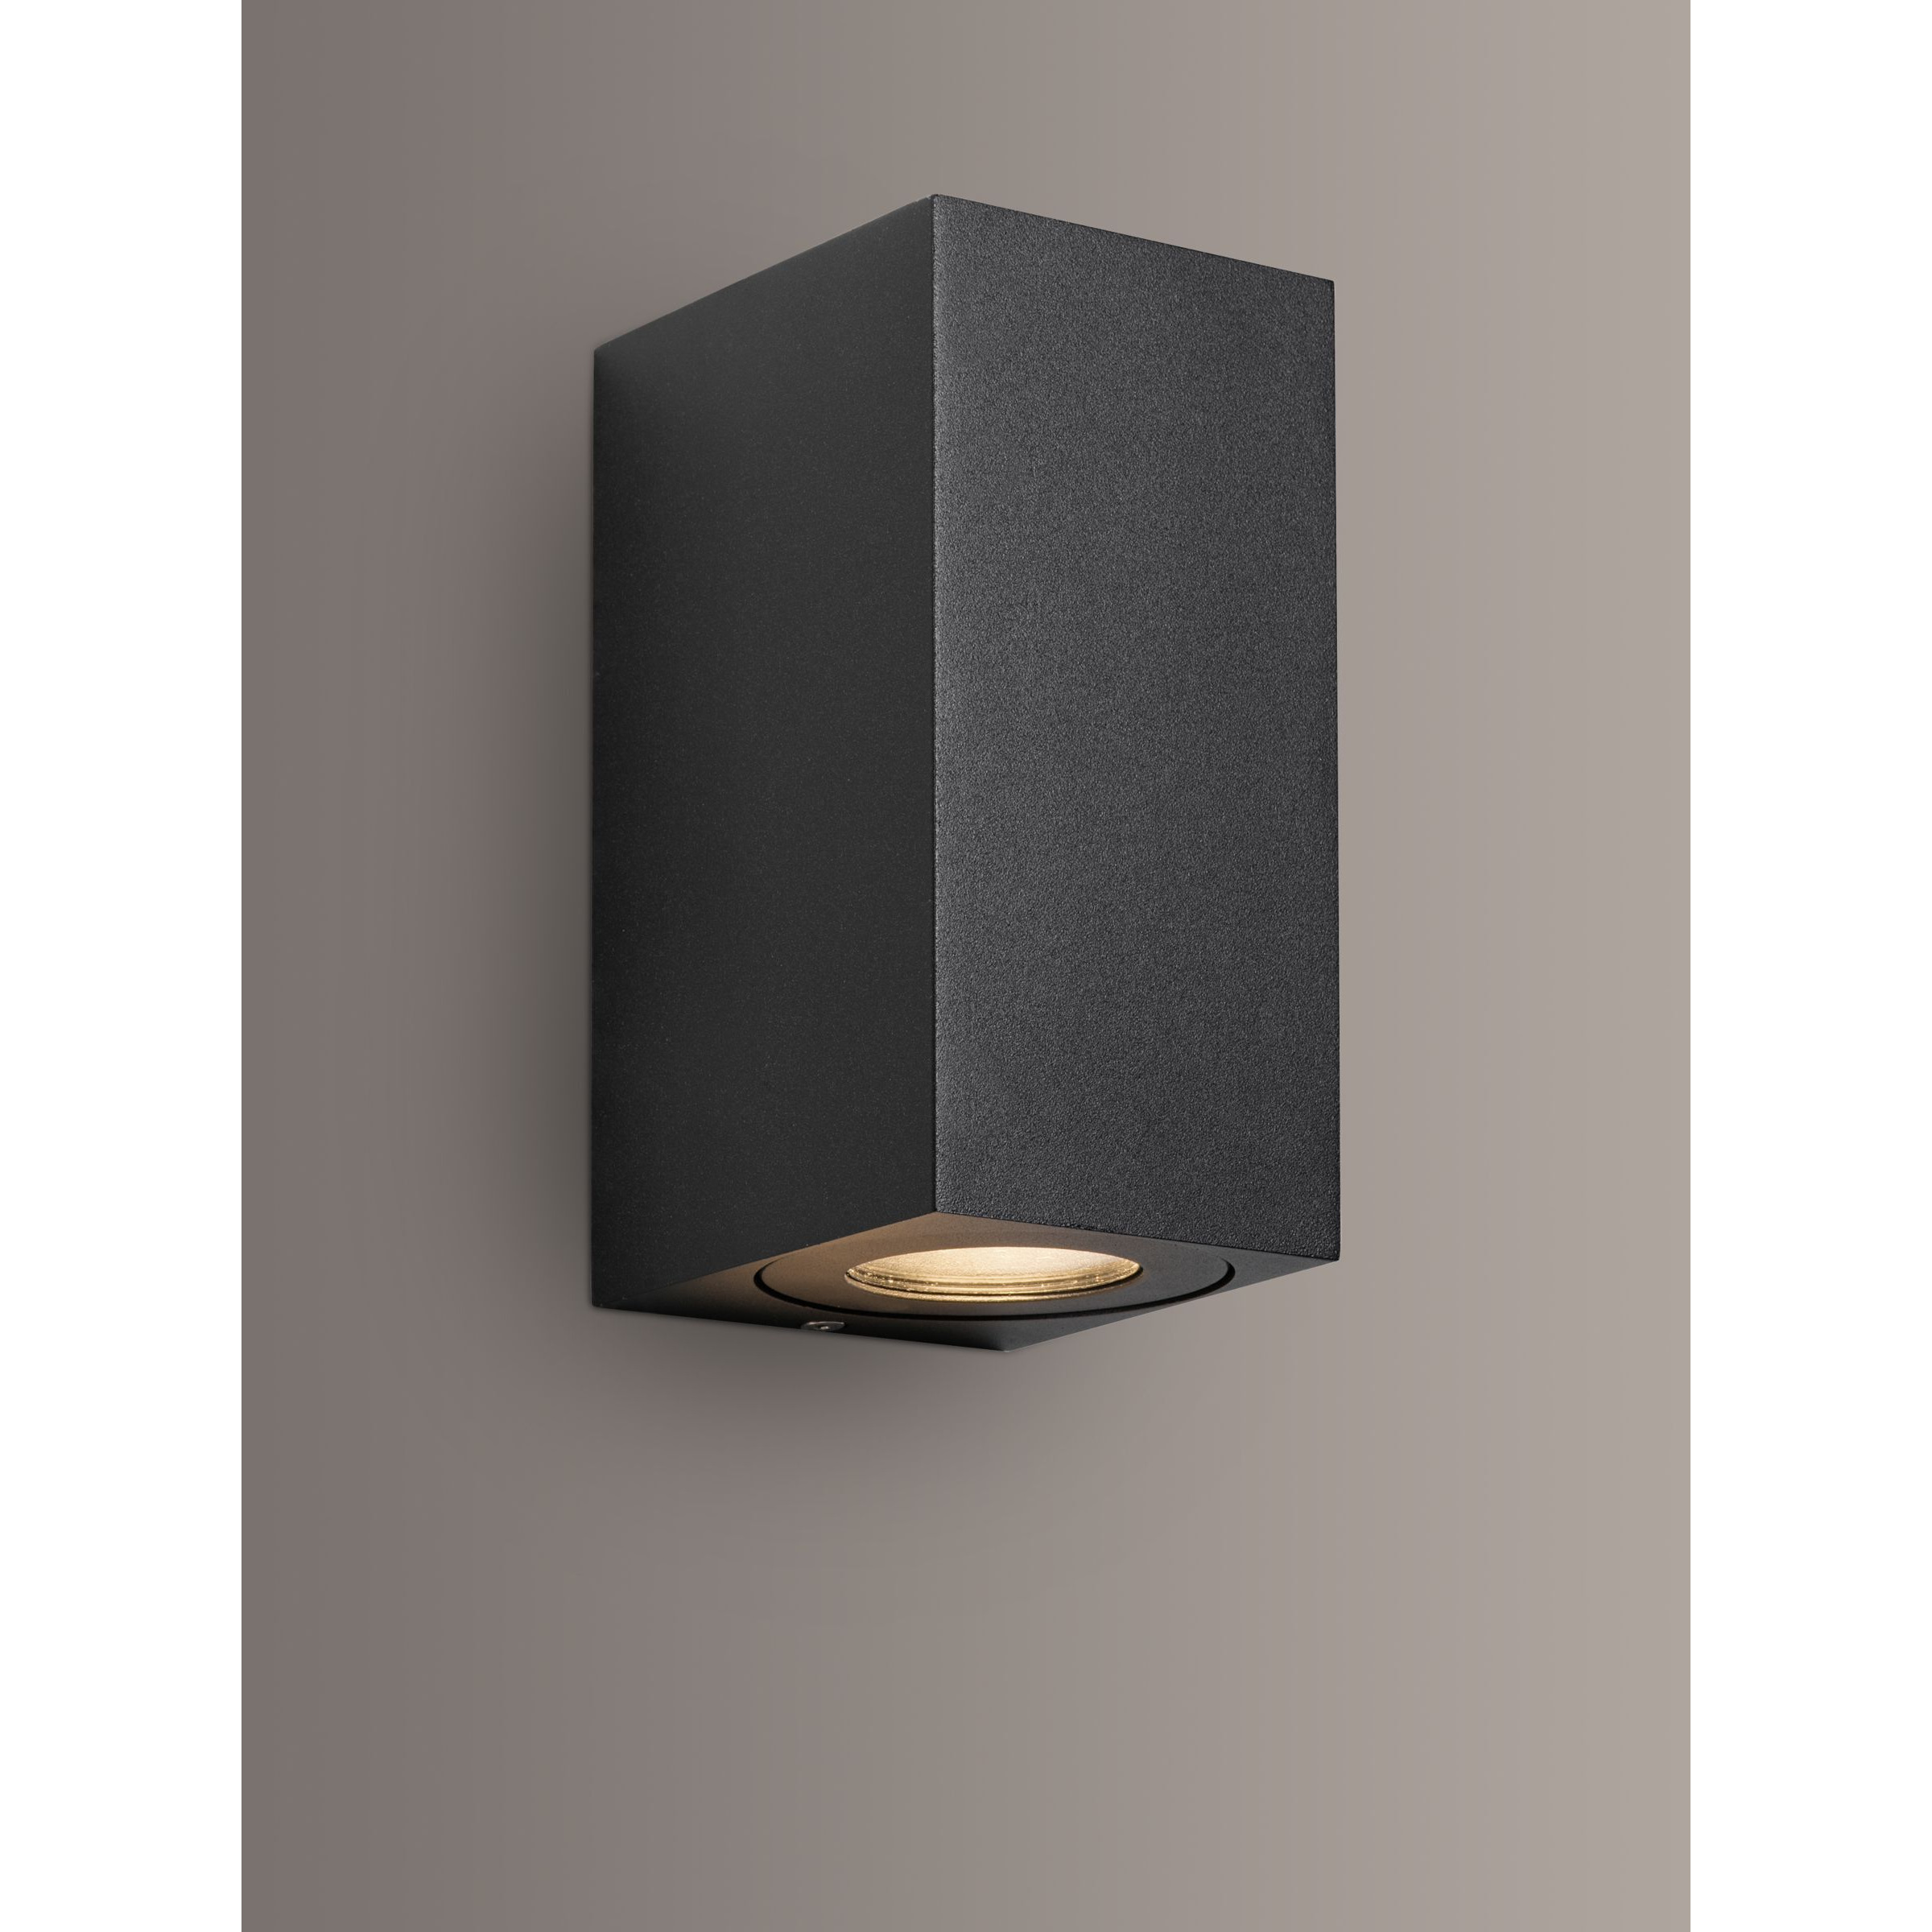 Nordlux Canto Maxi Kubi Outdoor Wall Light - image 1